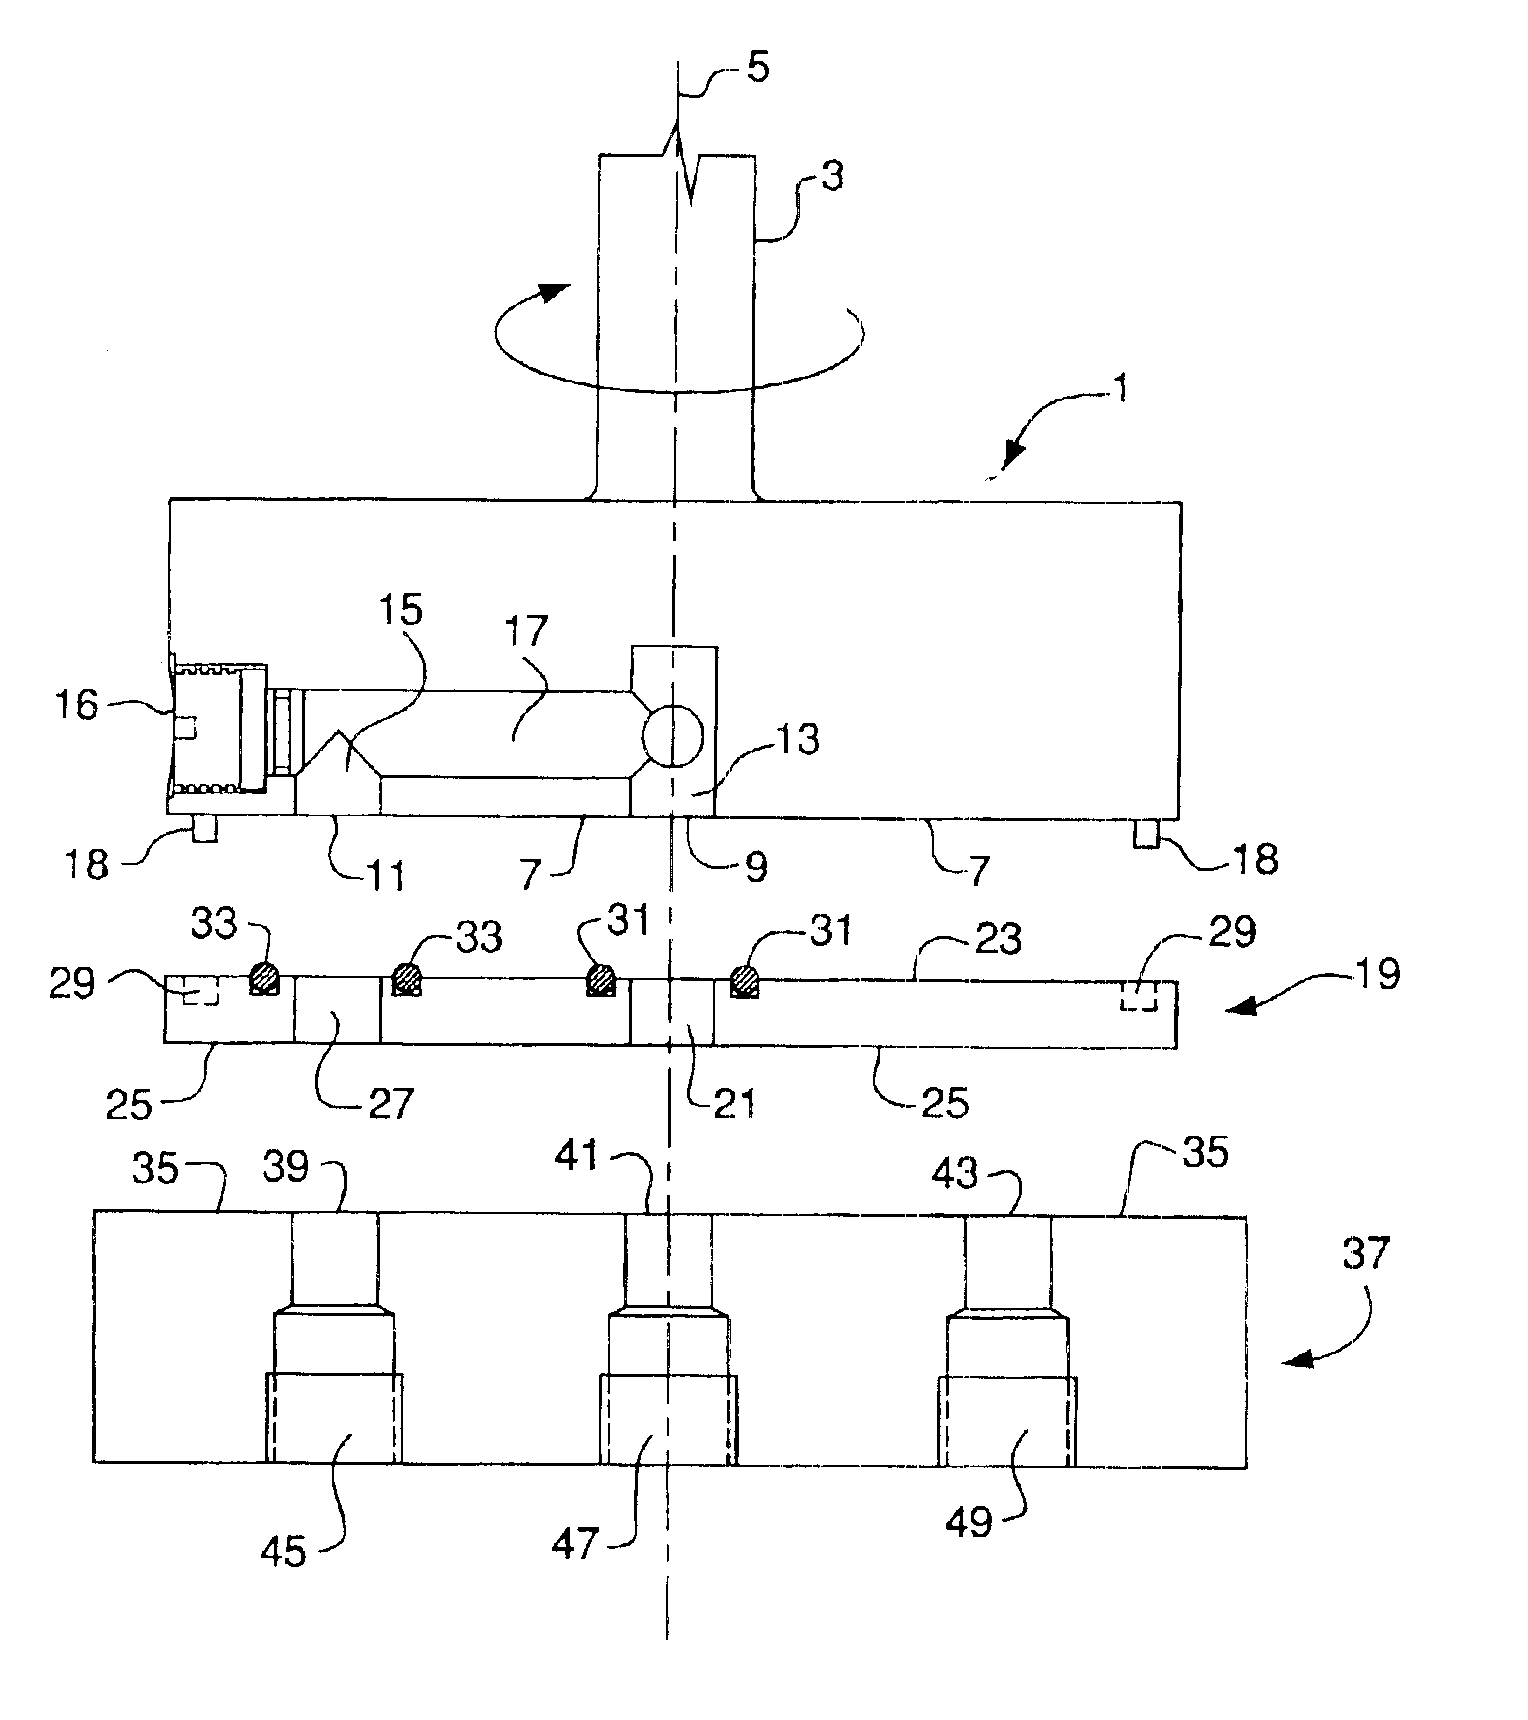 Rotary sequencing valve with flexible port plate